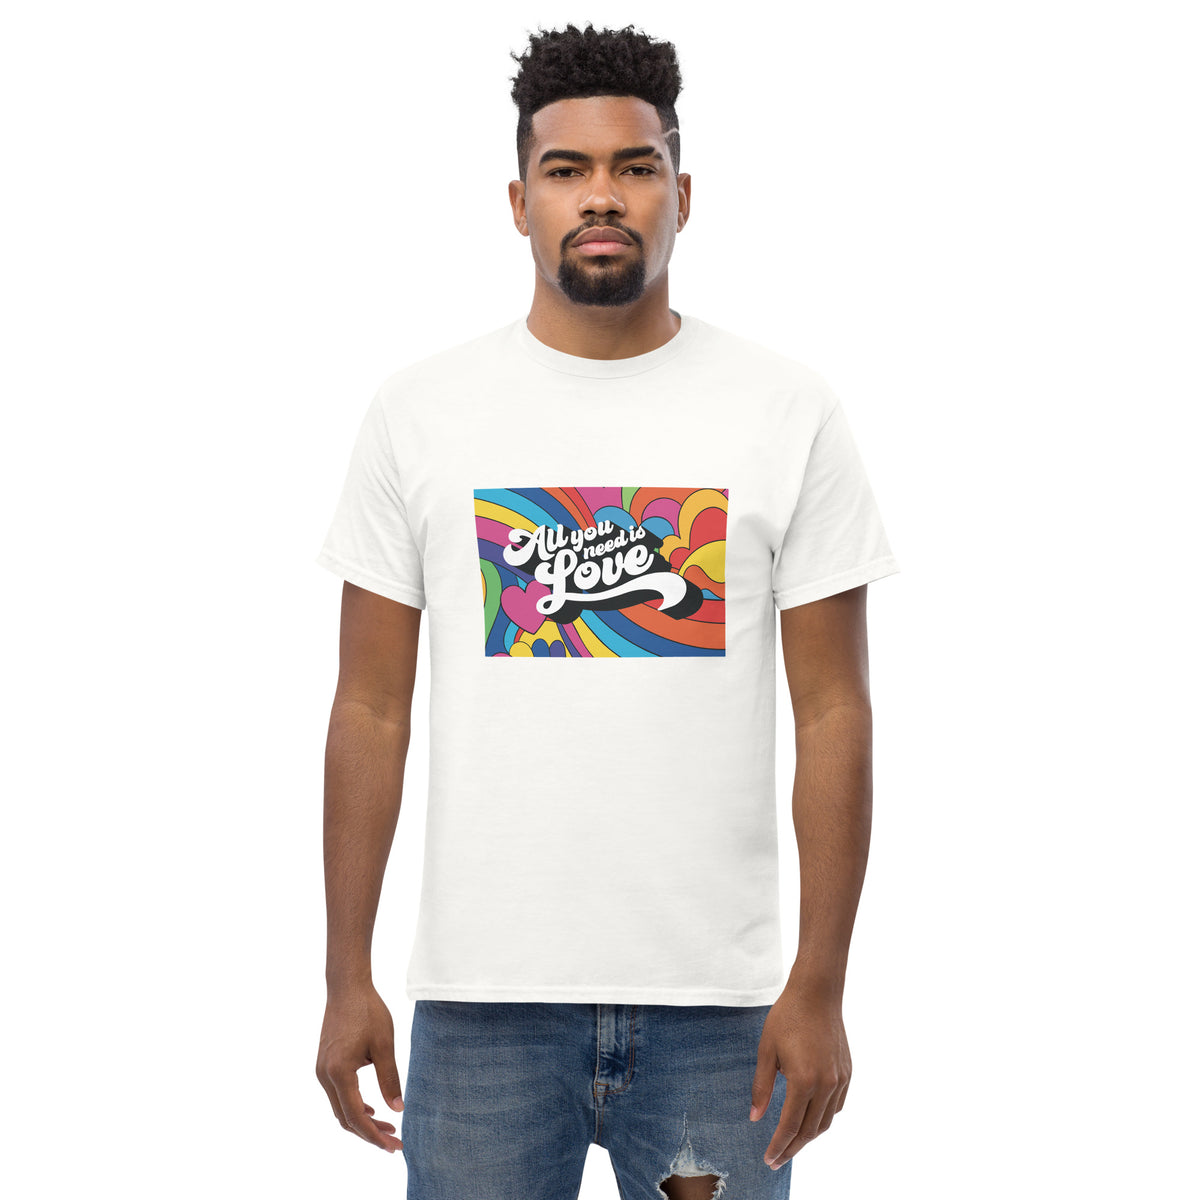 All You Need is Love Men's classic tee